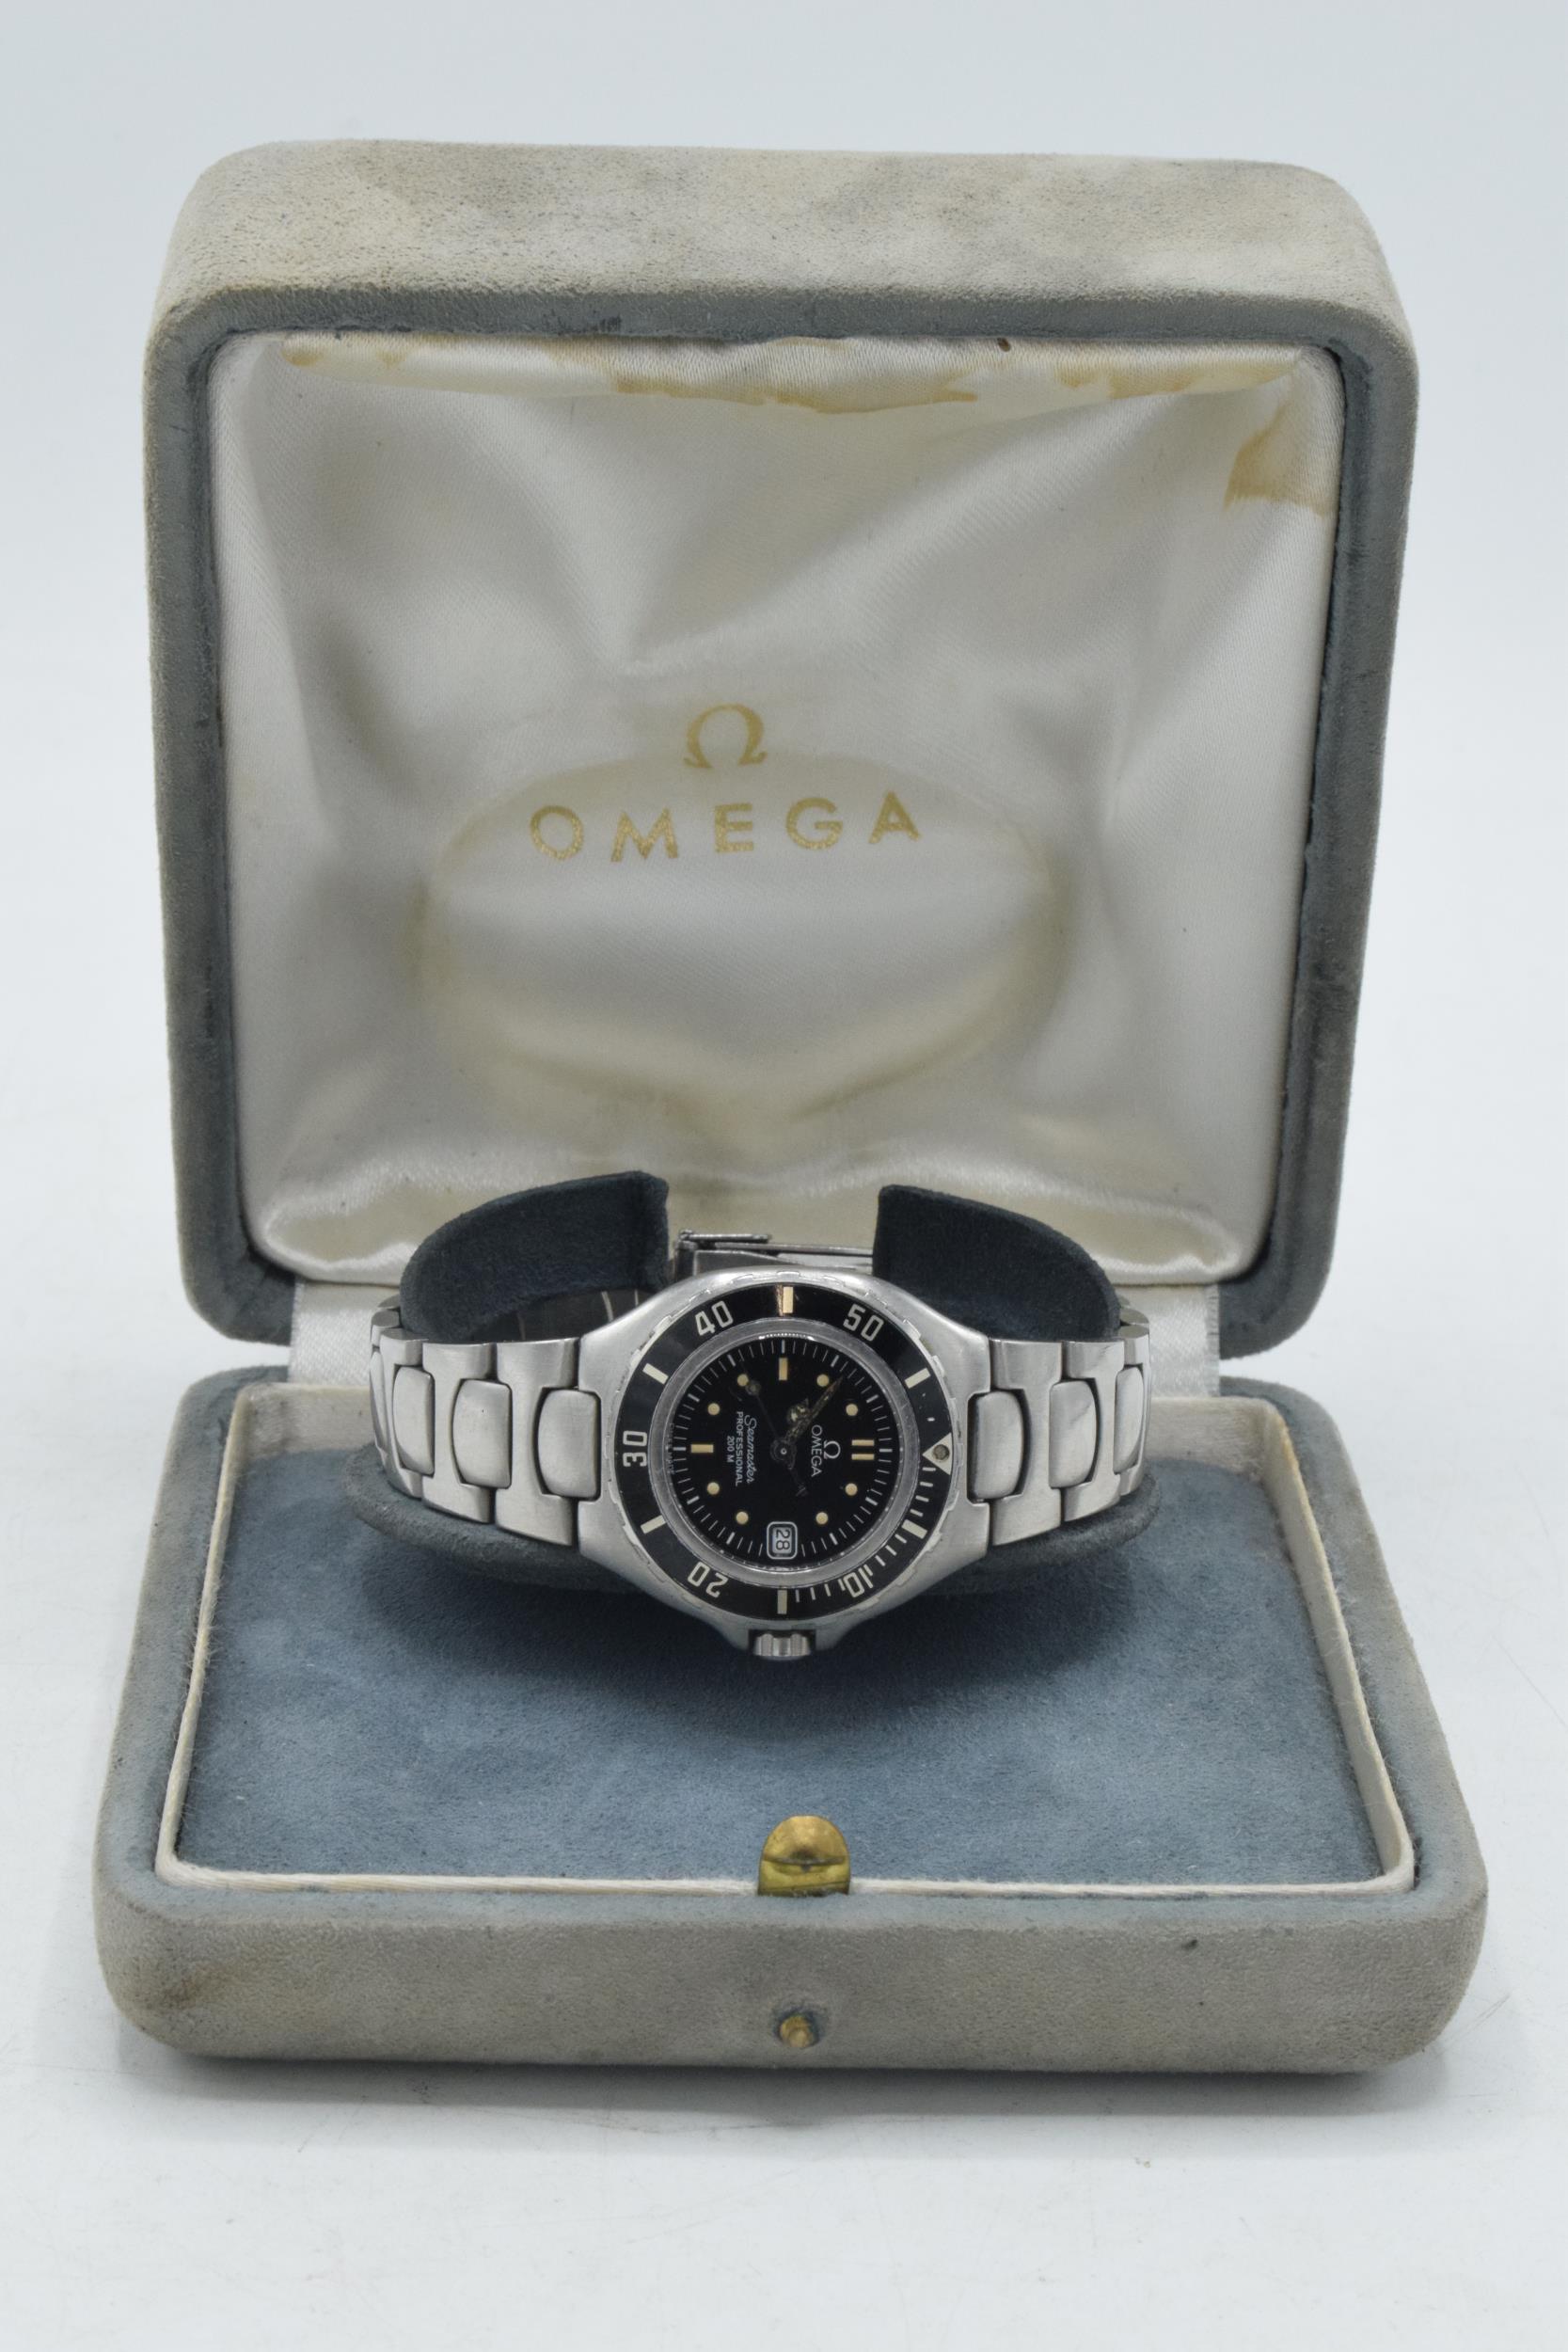 Boxed Omega Seamaster Professional 200 M, stainless steel bracelet, in working / ticking order, 28mm - Image 2 of 6